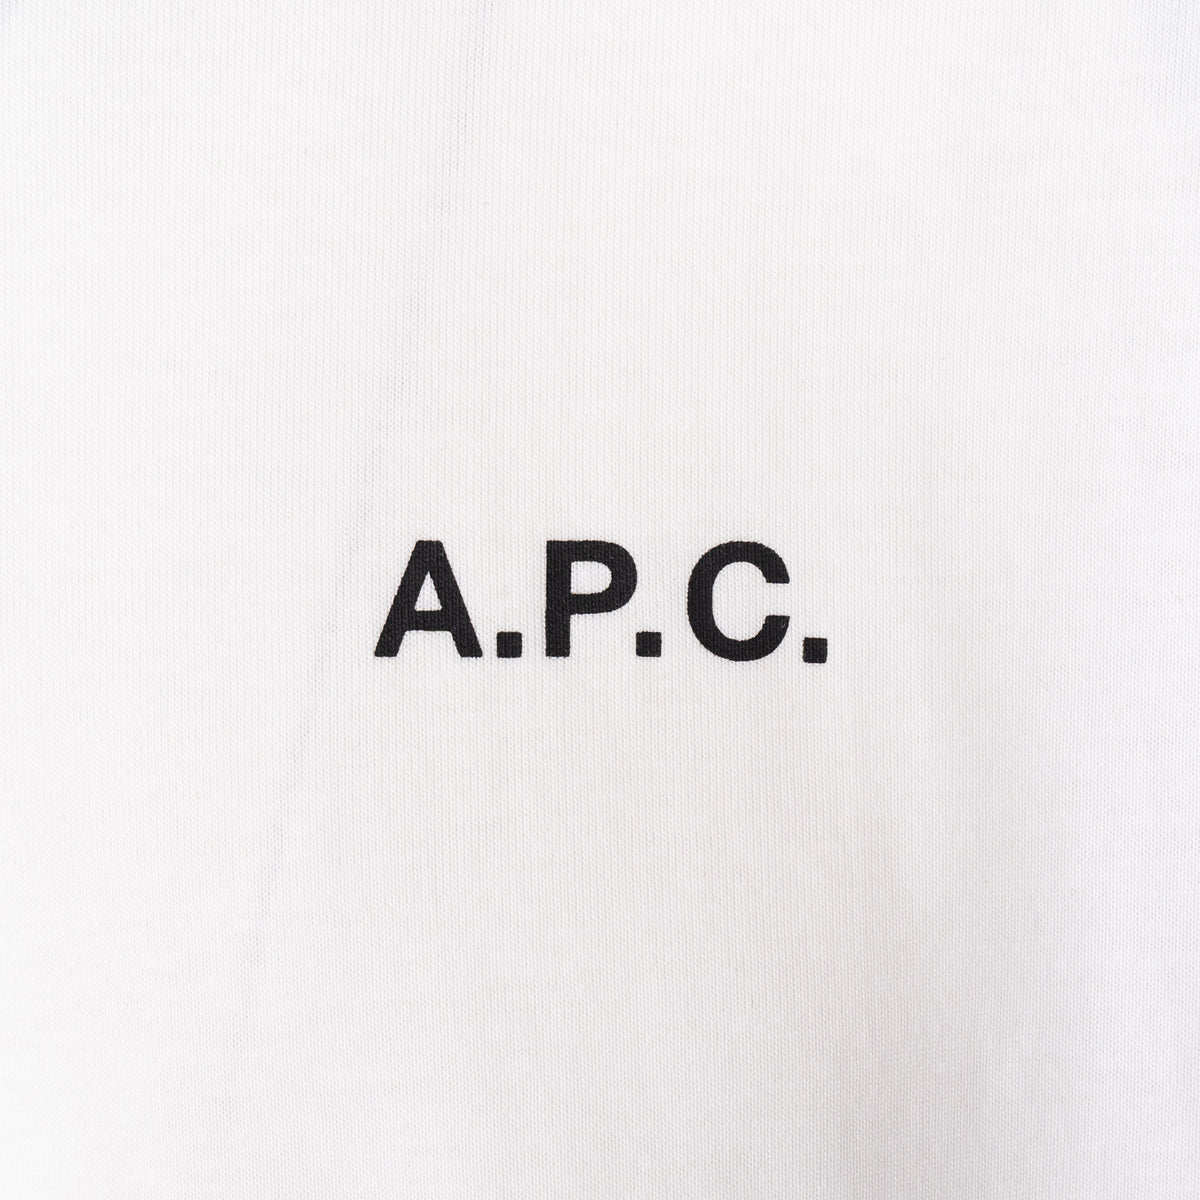 Load image into Gallery viewer, A.P.C. White Wave Tee
